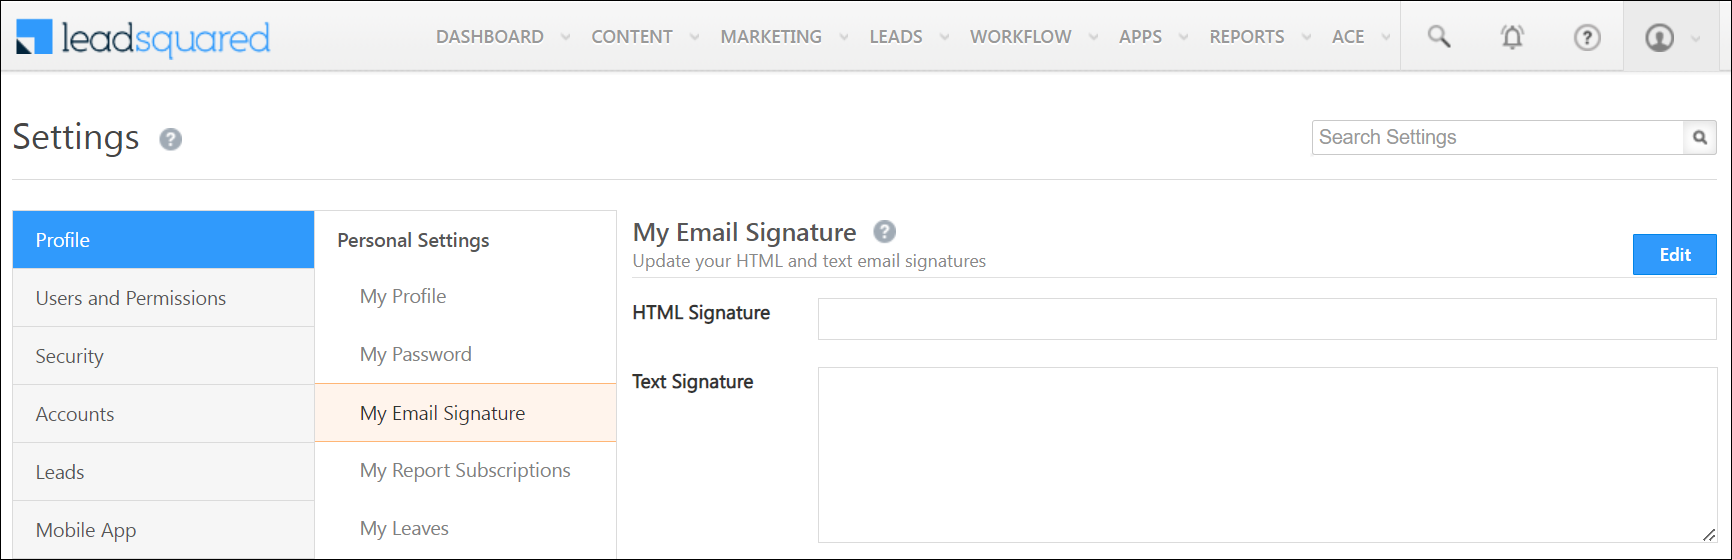 LeadSquared Email Signatures Feature